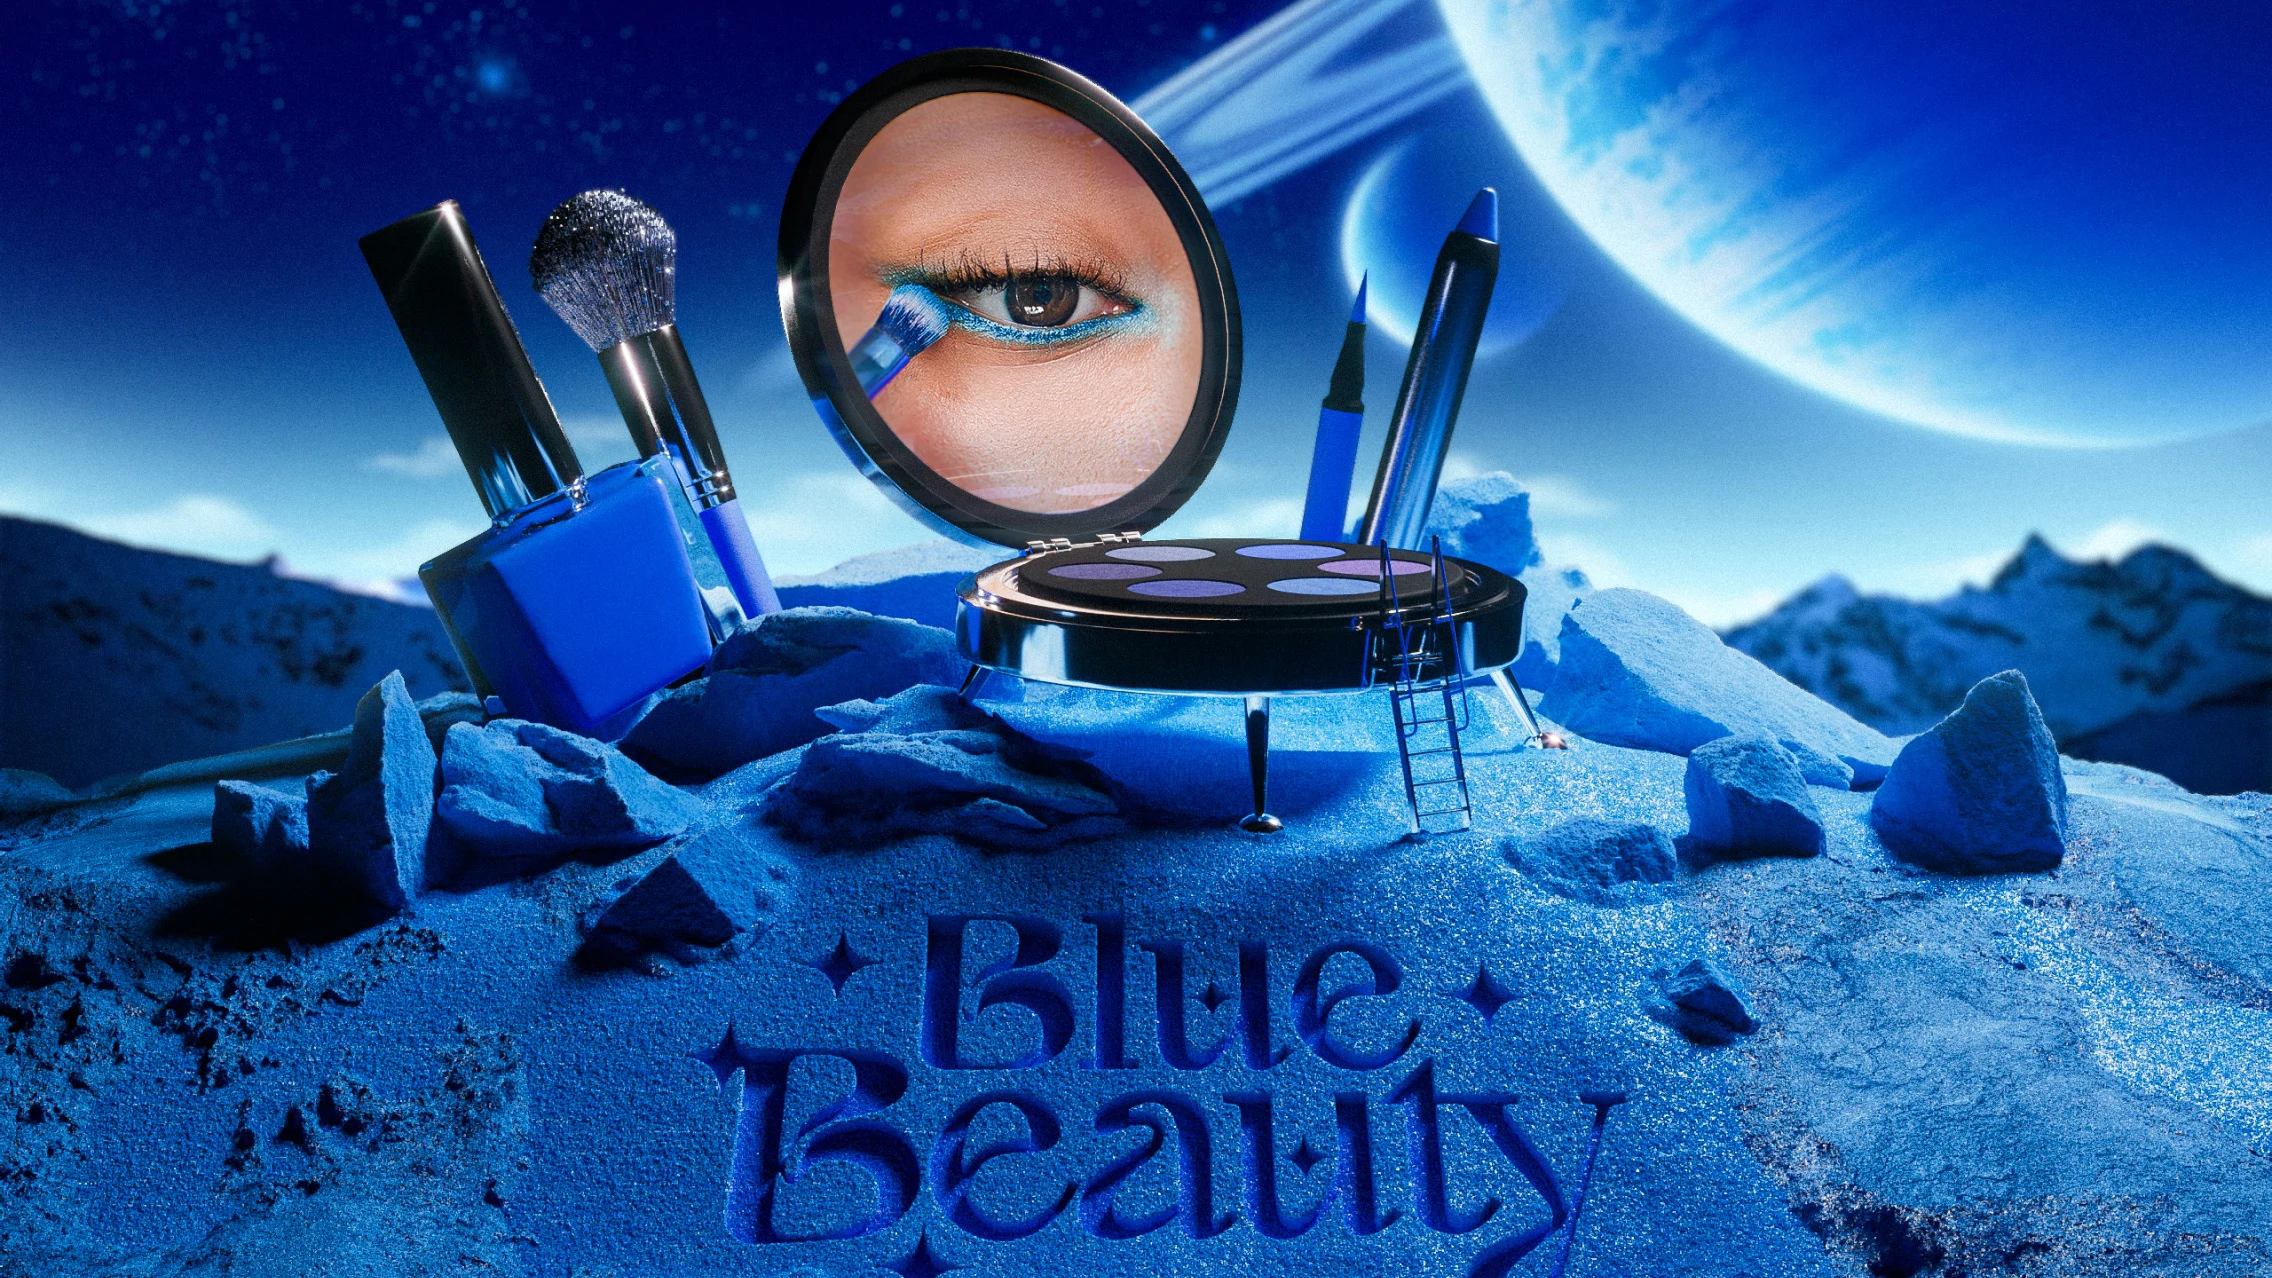 Galactic scene with oversize makeup products including a compact mirror inset with a closeup of an eye with blue eyeliner. “Blue beauty” is etched into the foreground, which is made out of crushed blue makeup. 